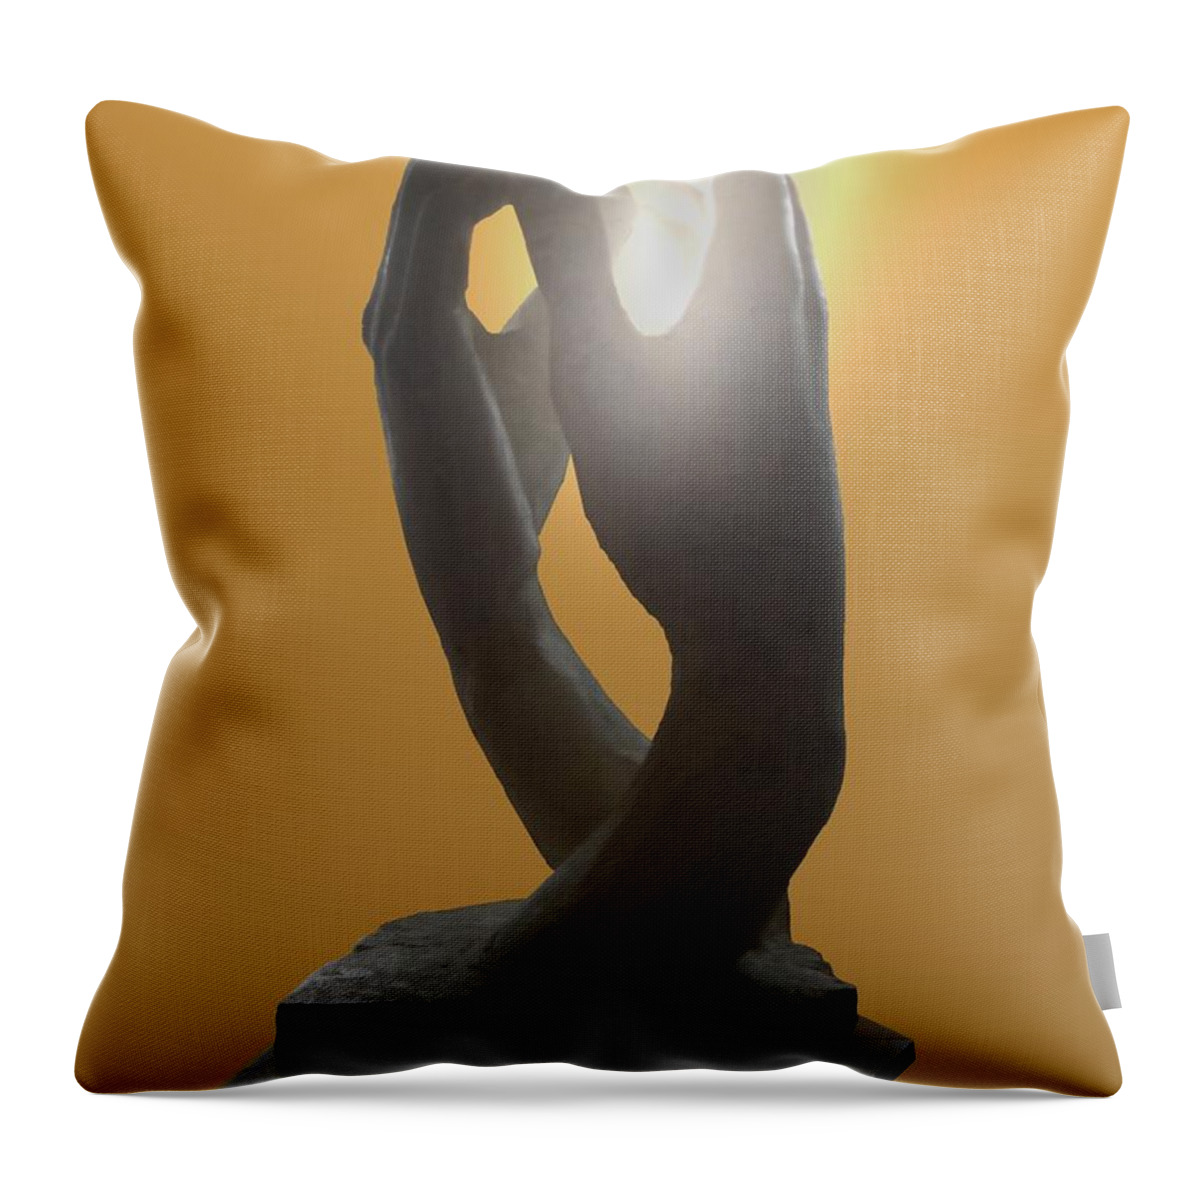 Sculpture Throw Pillow featuring the photograph Hands by Rodin by Manuela Constantin